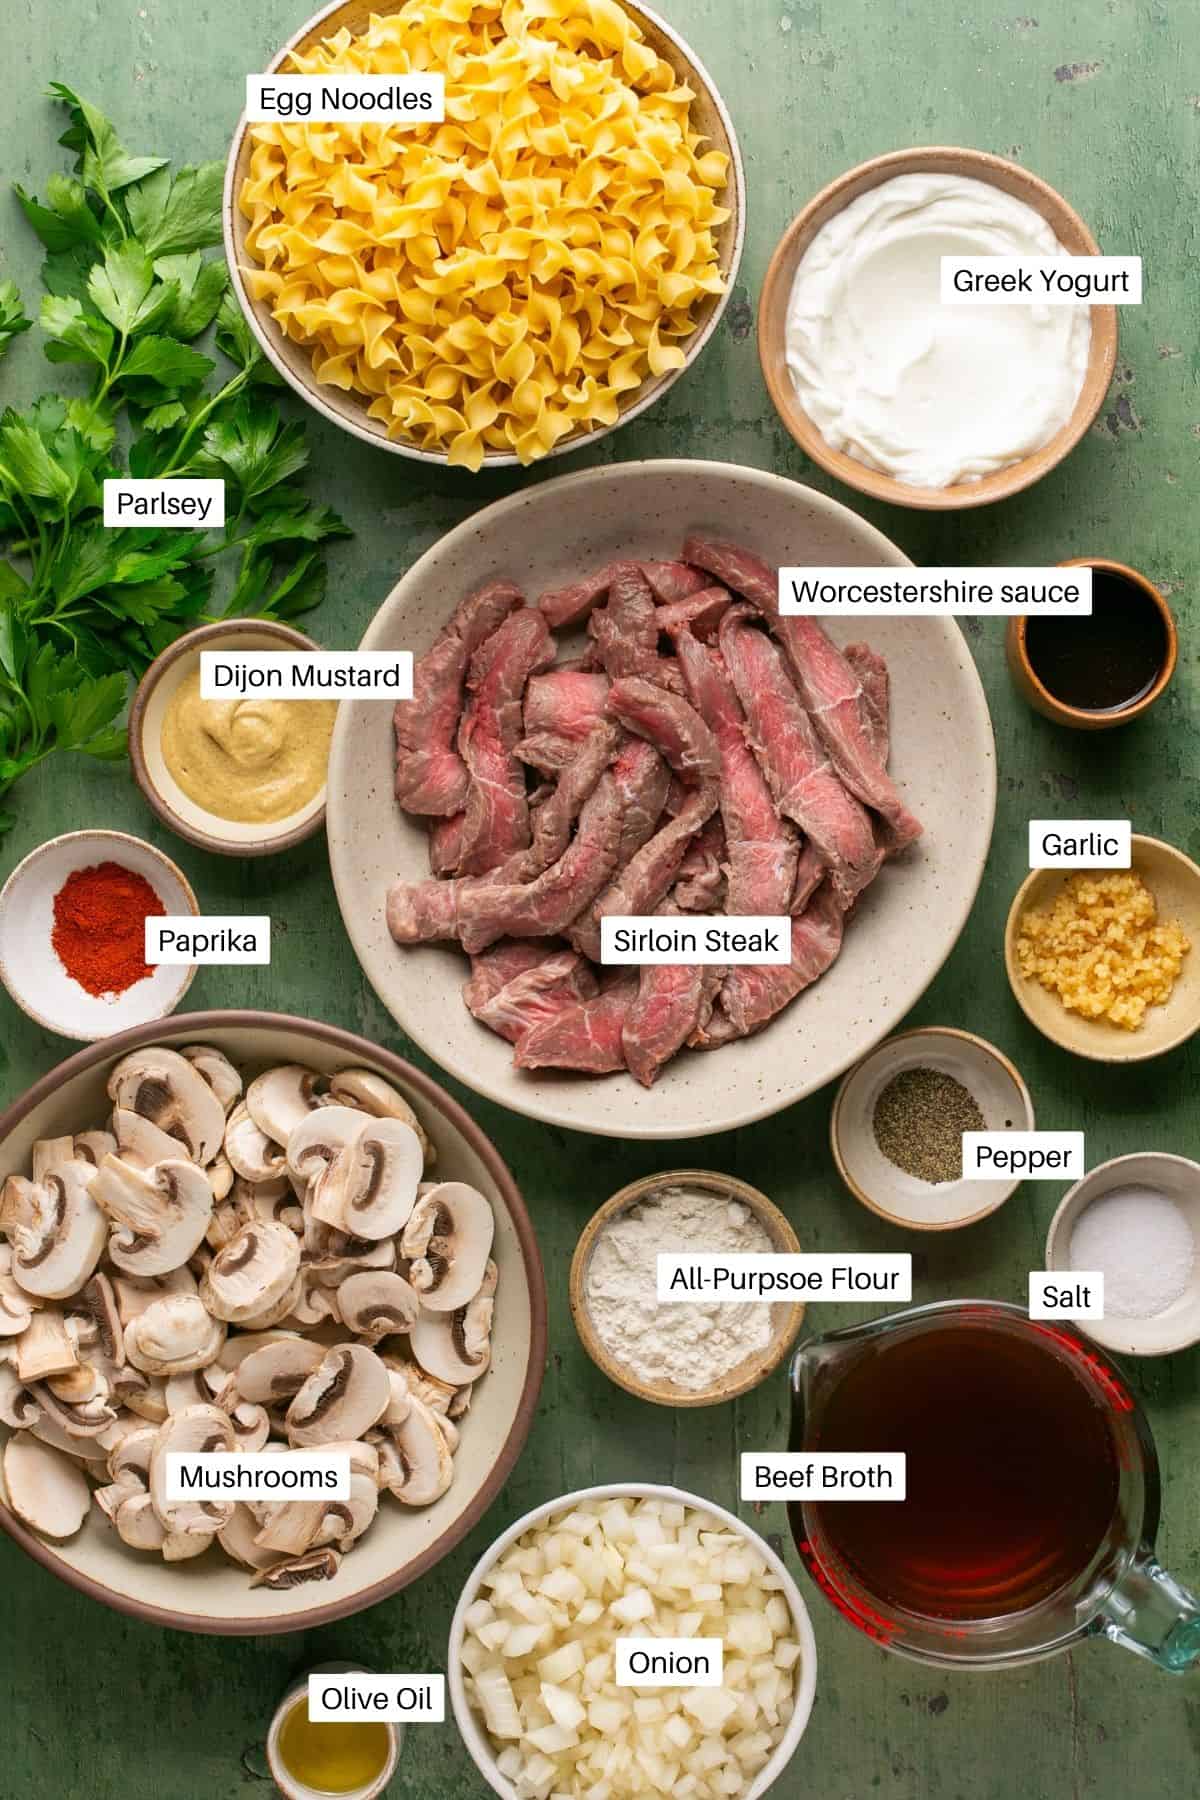 Sliced beef, mushrooms, egg noodles, greek yogurt, spices, broth and parsley for the dish. 